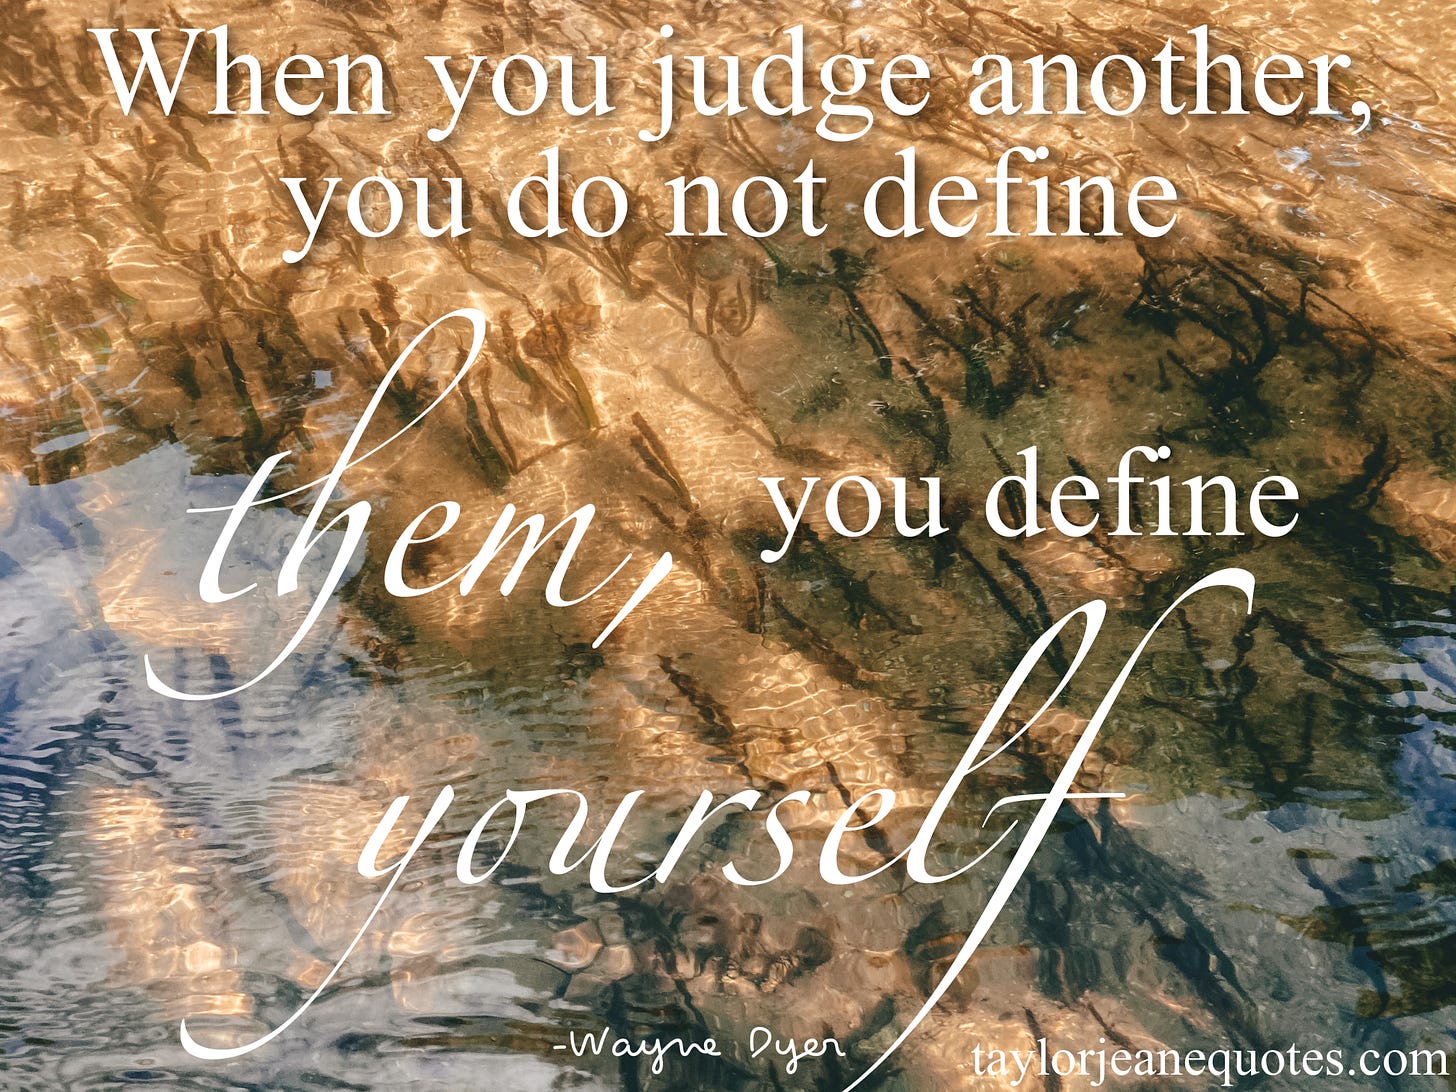 taylor jeane quotes, quote of the day, quotes, wayne dyer, wayne dyer quotes, inspirational quotes, motivational quotes, uplifting quotes, positive quotes, social quotes, social anxiety quotes, judgement quotes, how to deal with judgement